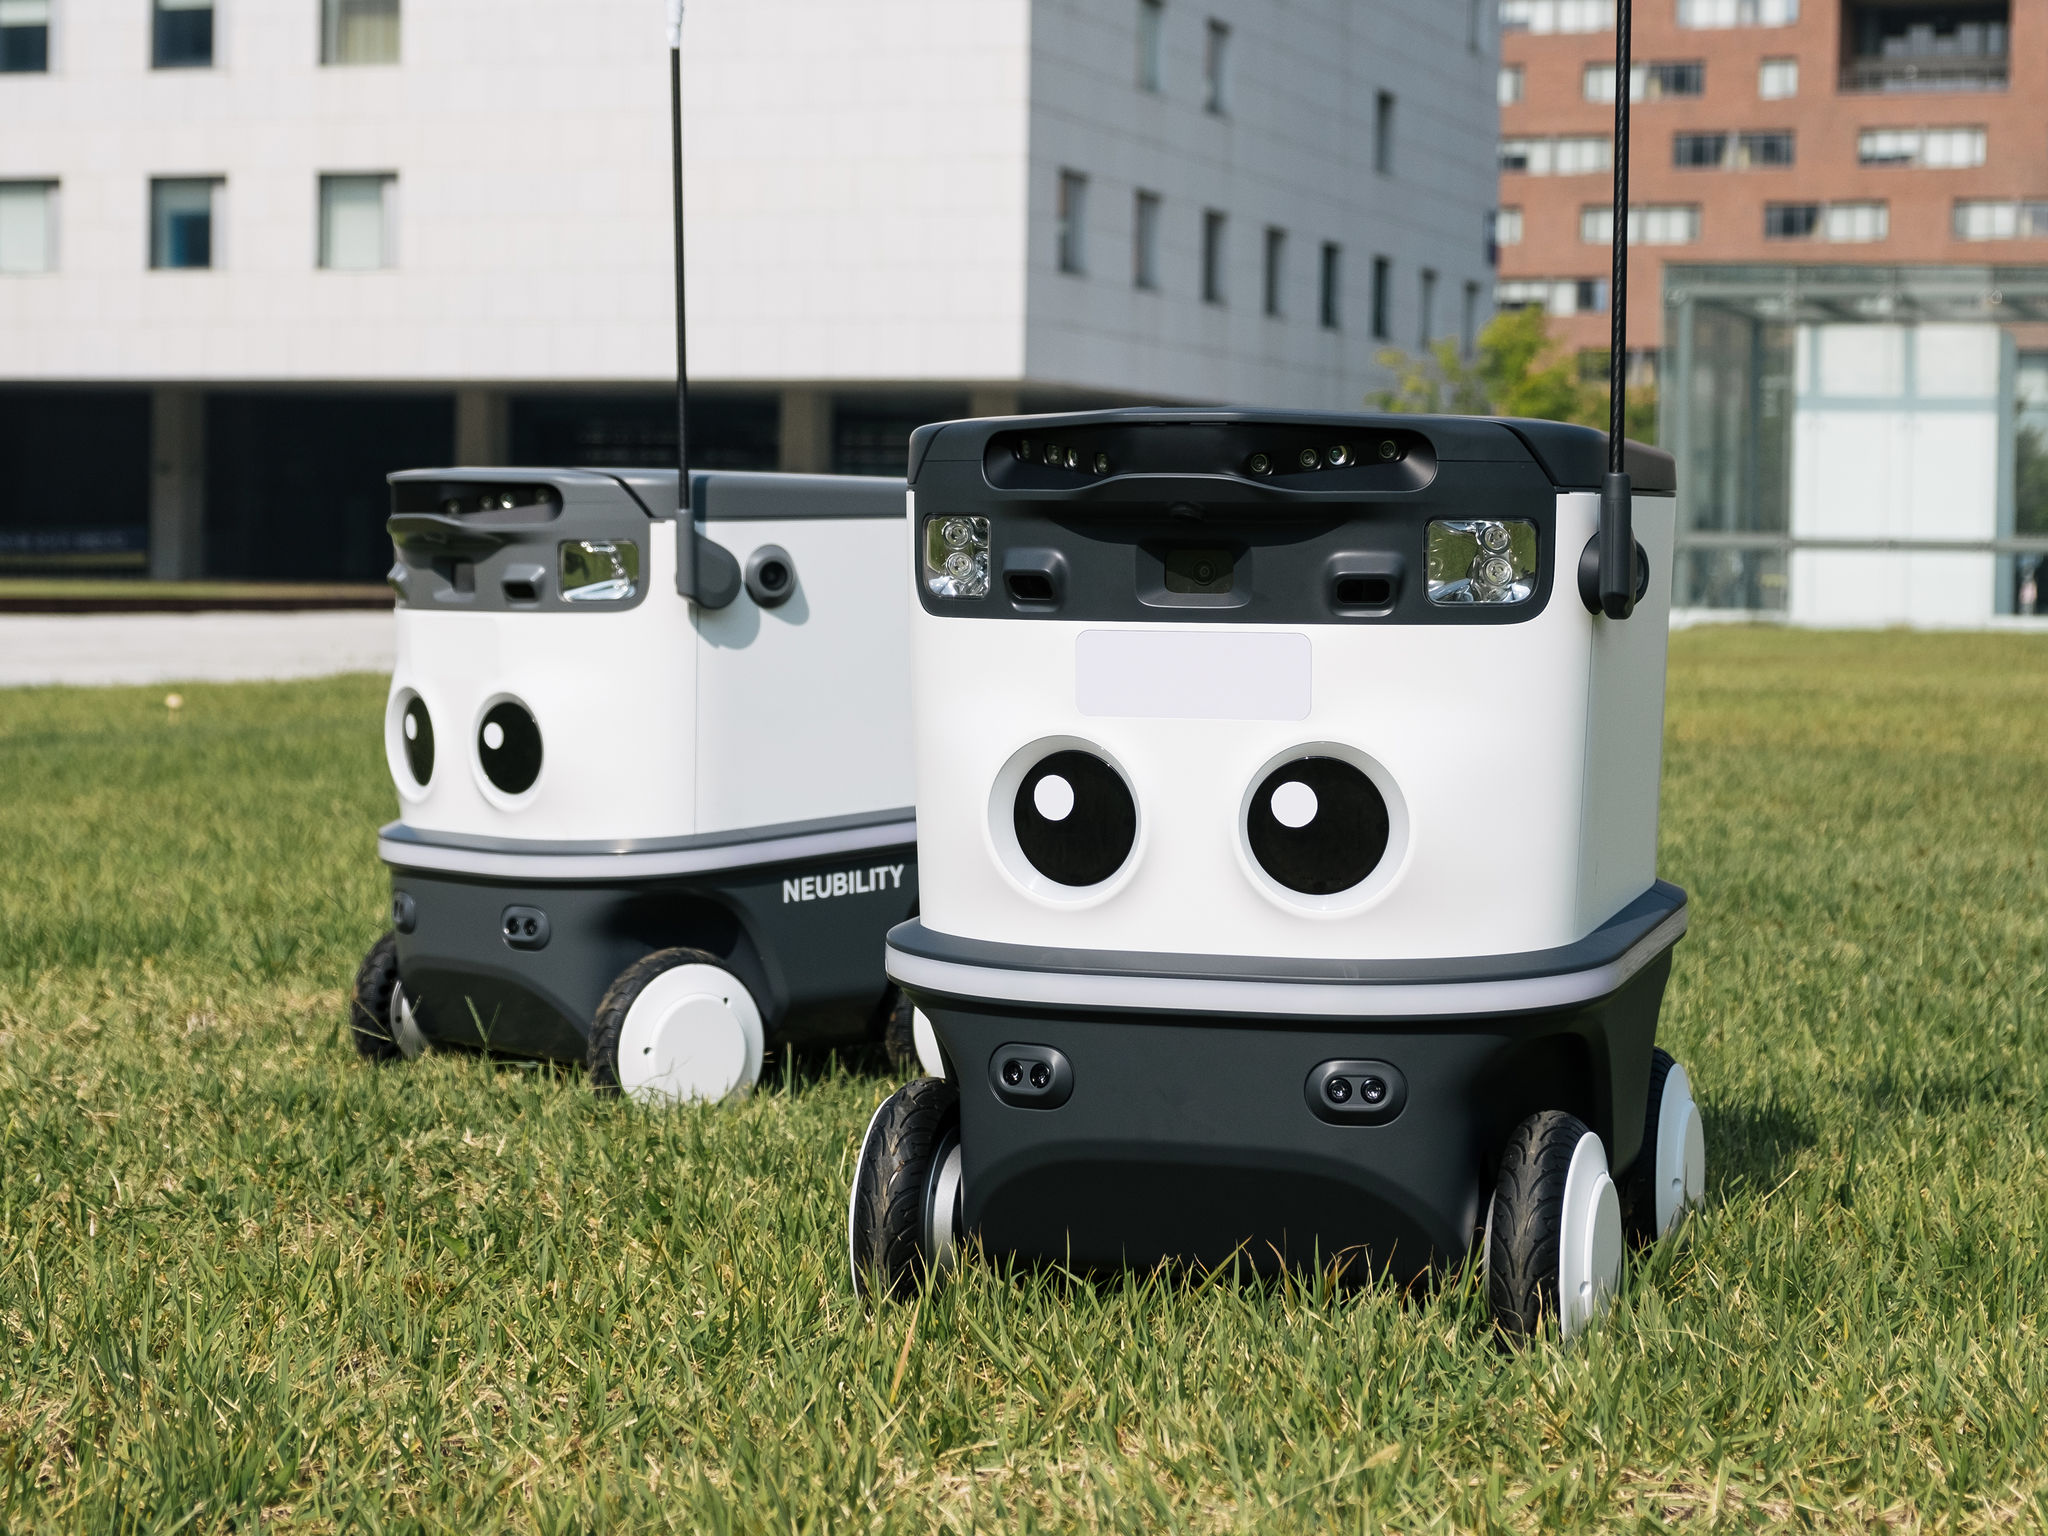 Neubility and Samsung will launch the world's first robotic delivery on golf courses